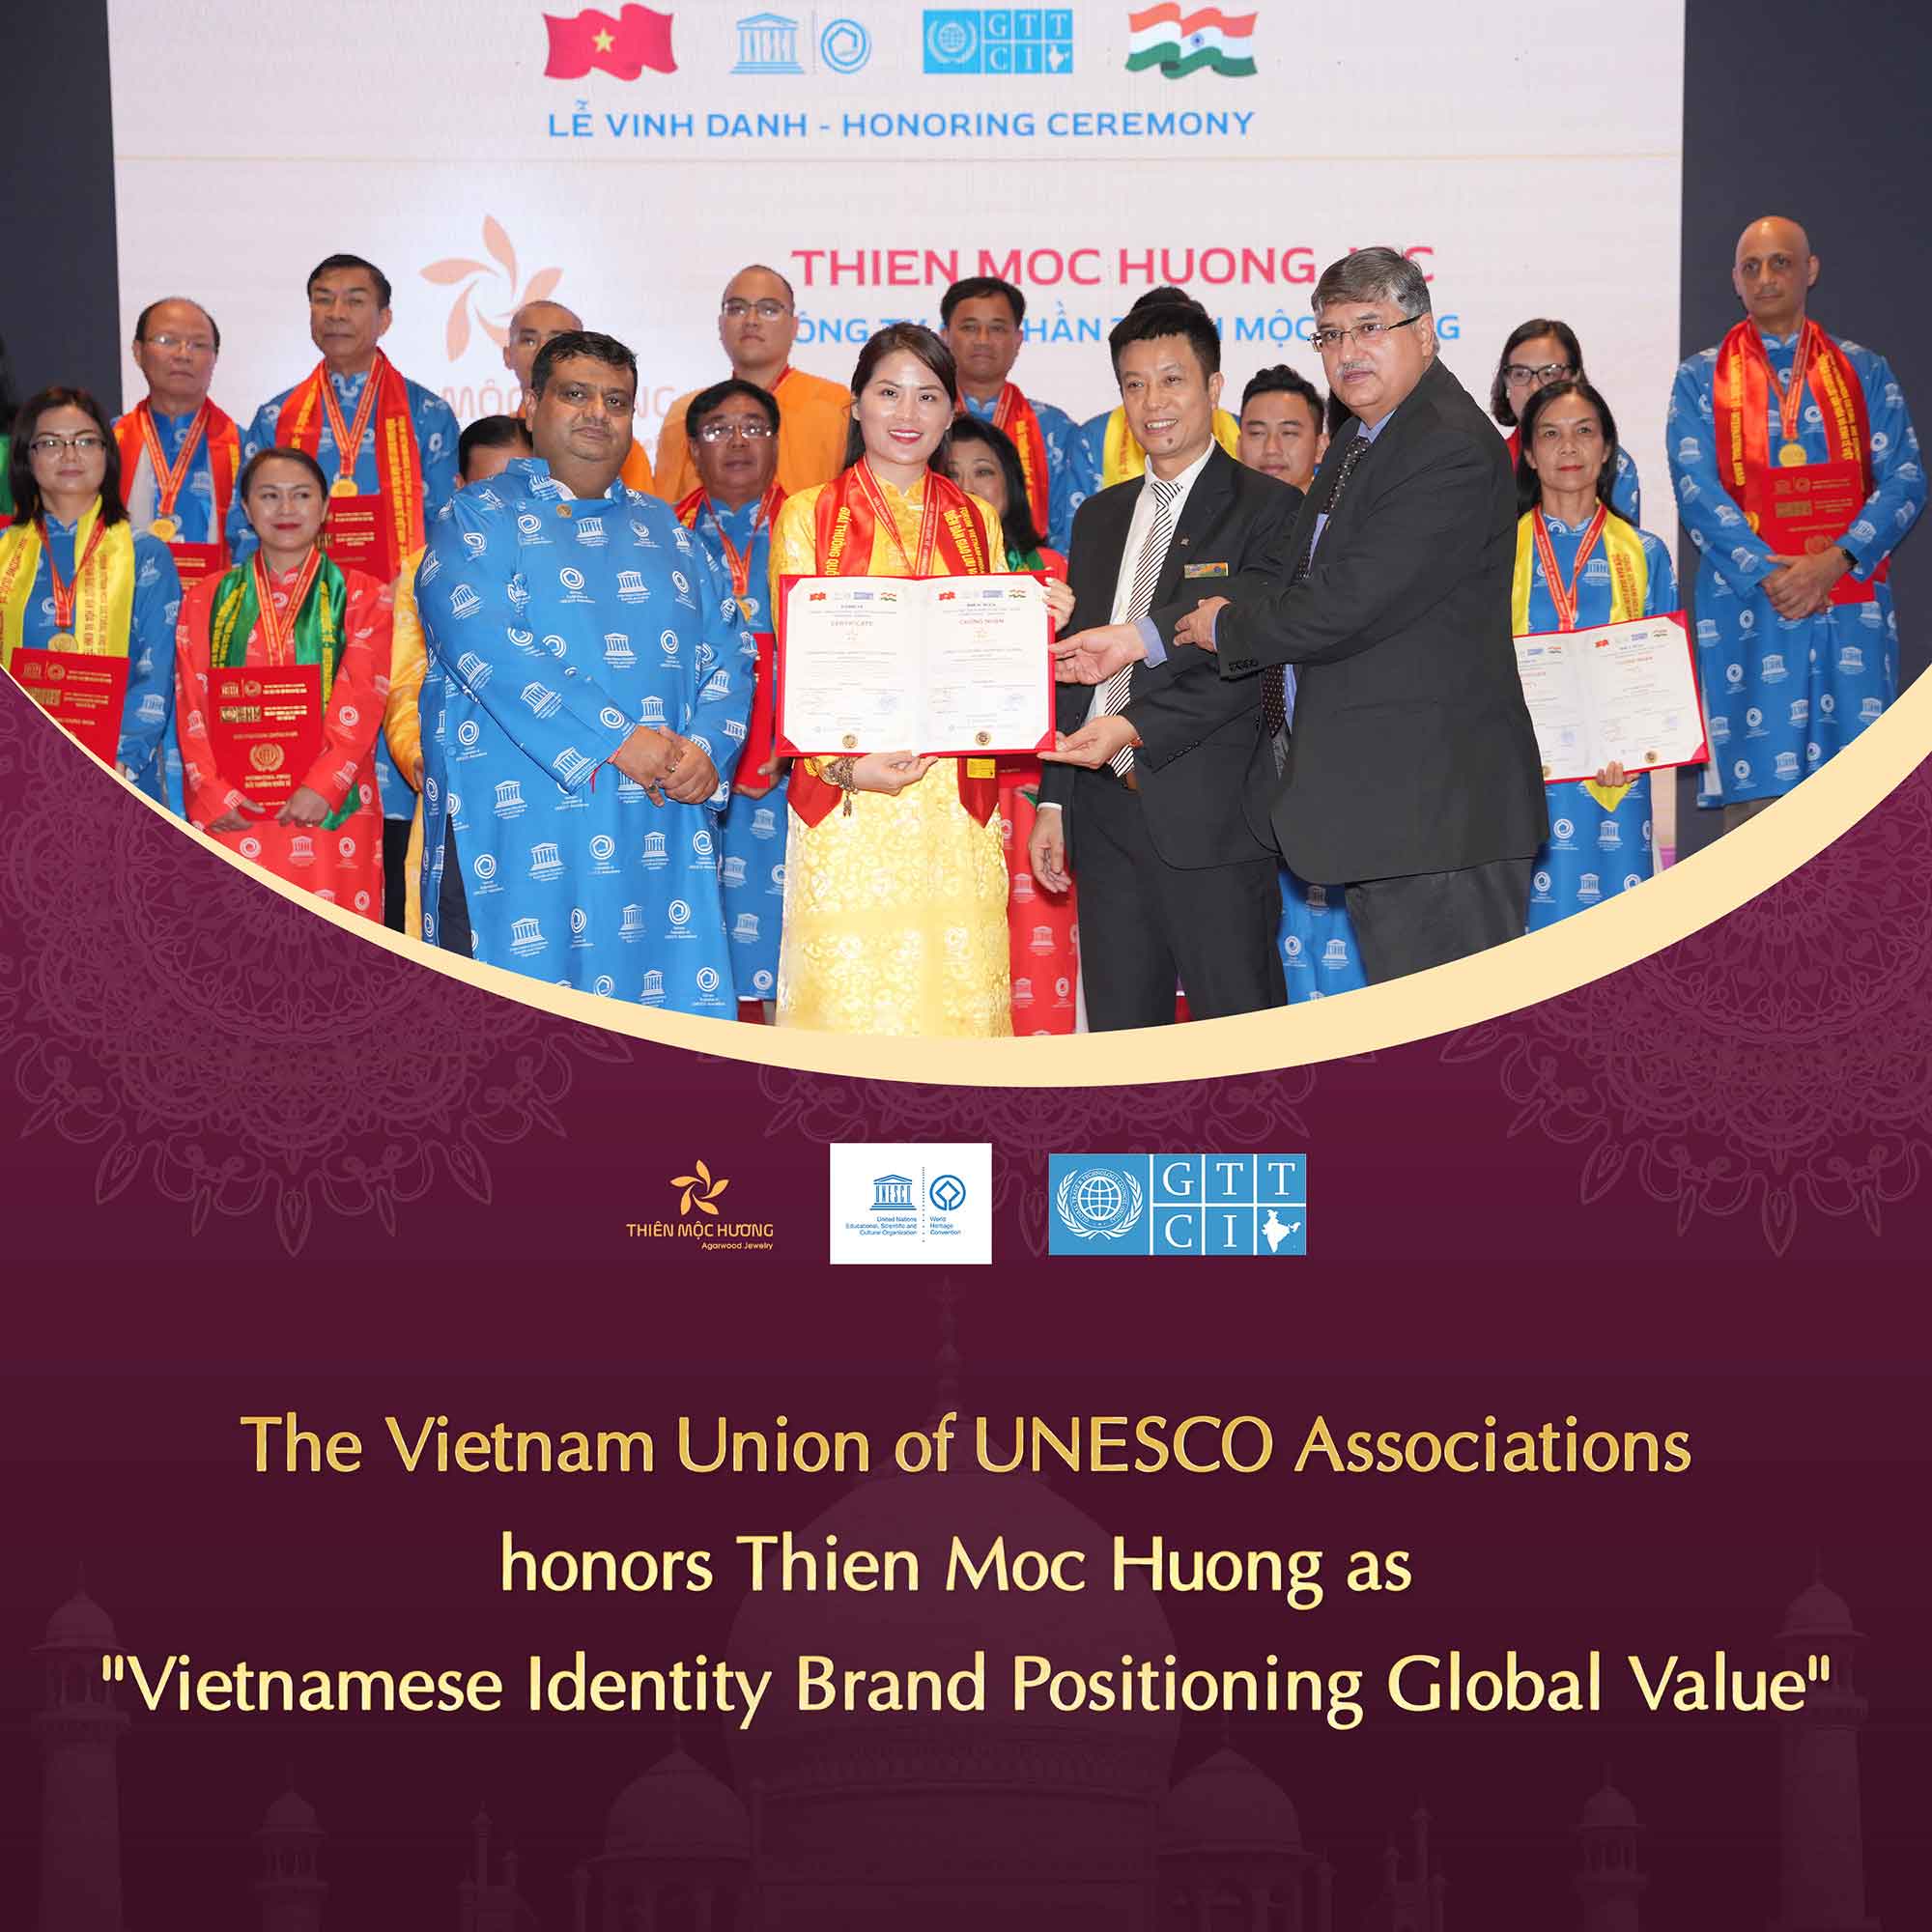 The Vietnam Union of UNESCO Associations Honors Thien Moc Huong as “Vietnamese Identity Brand Positioning Global Value”